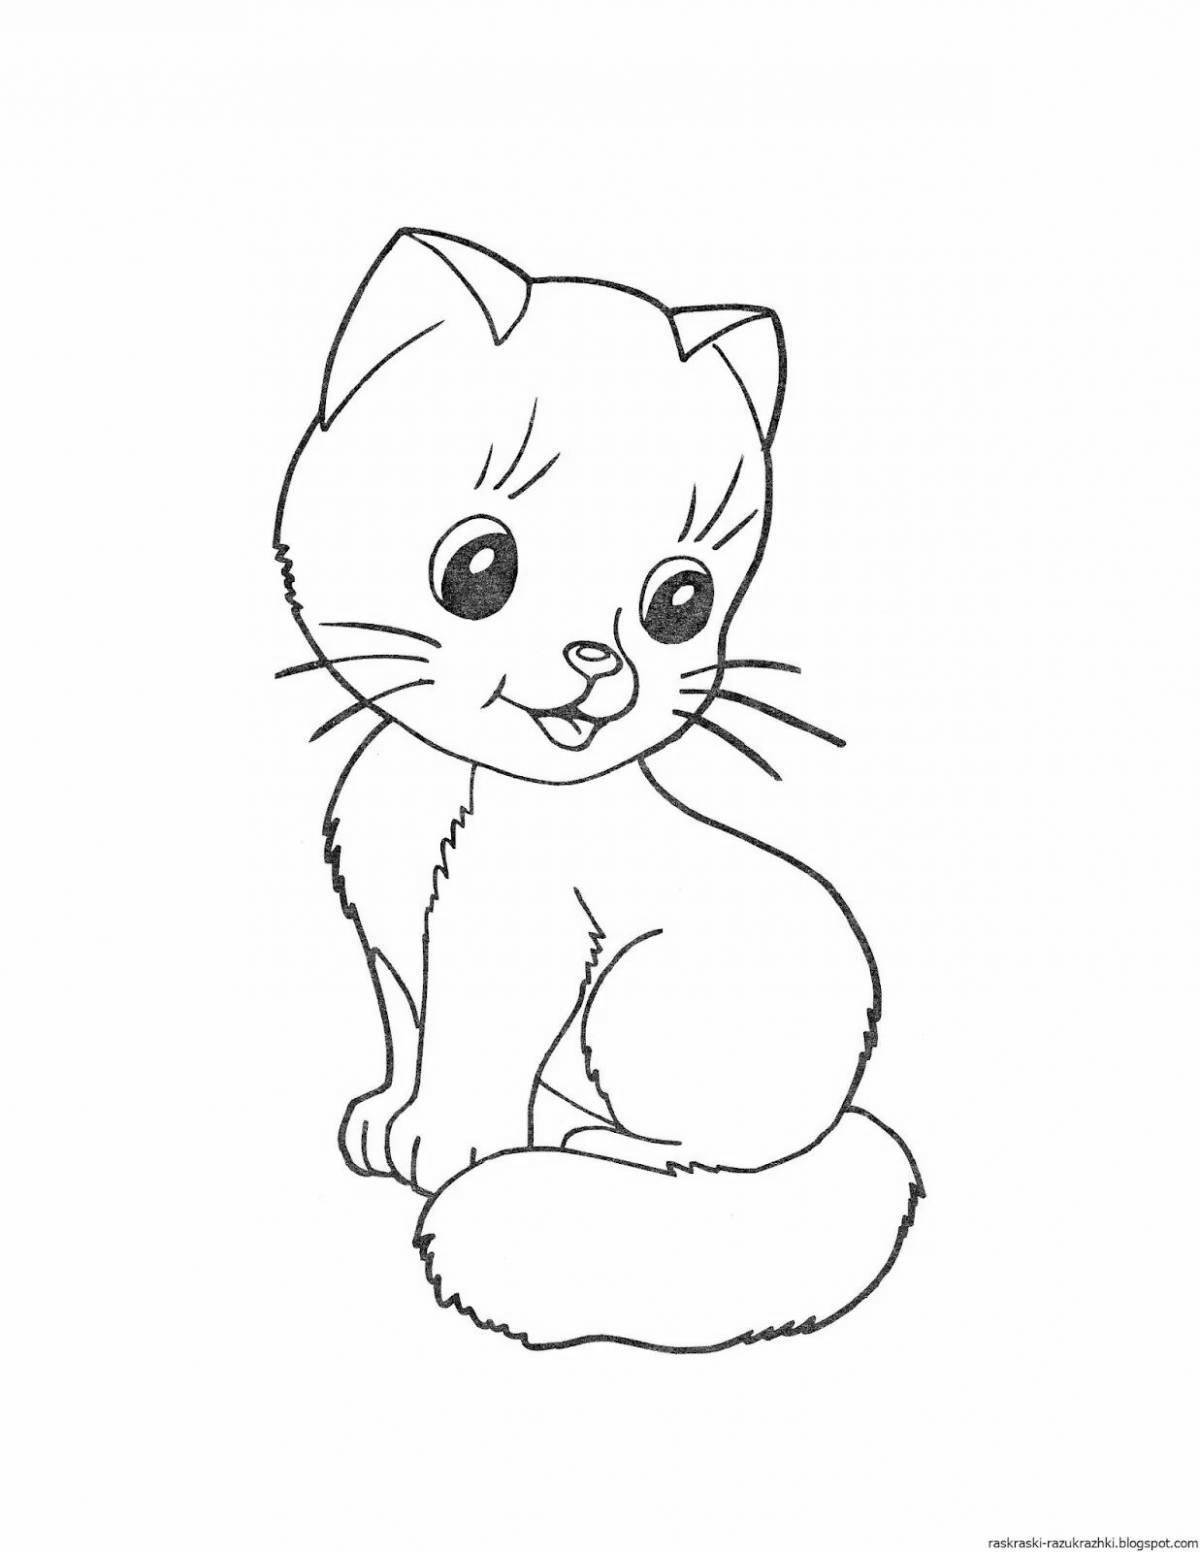 Kitty hypnotic coloring book for kids